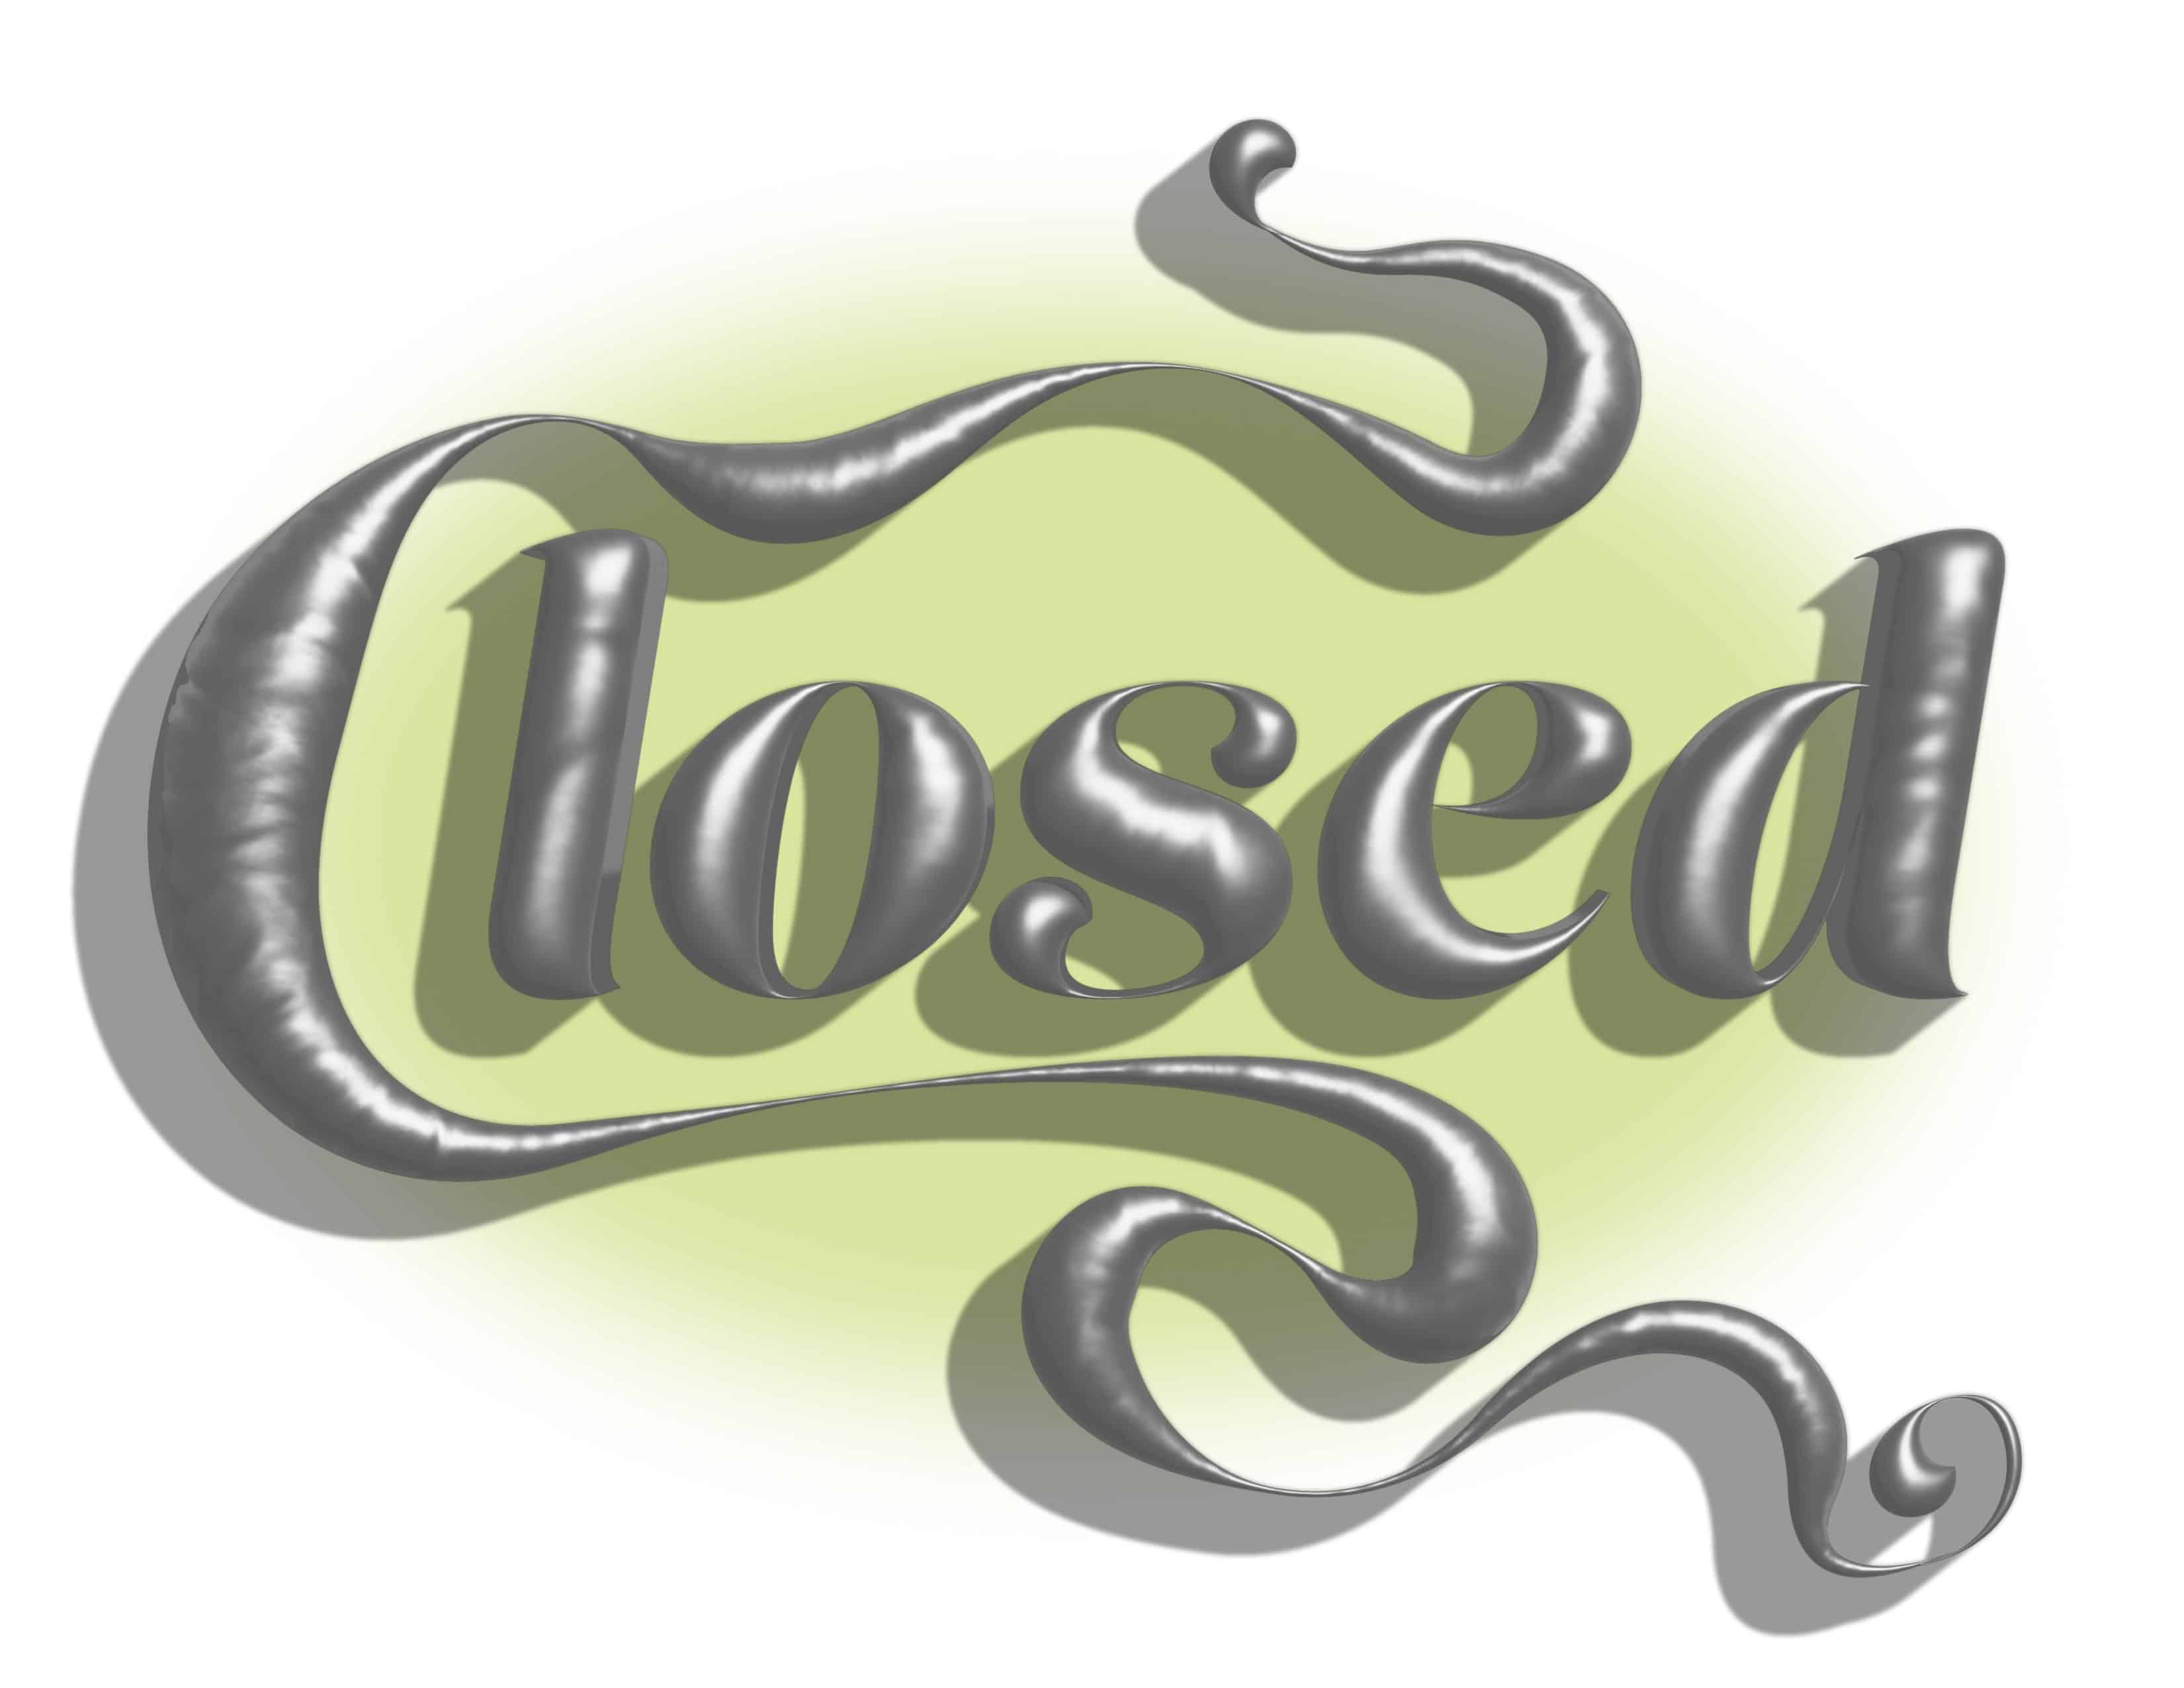 closed sign saying "closed" in a script font made from metallic paste